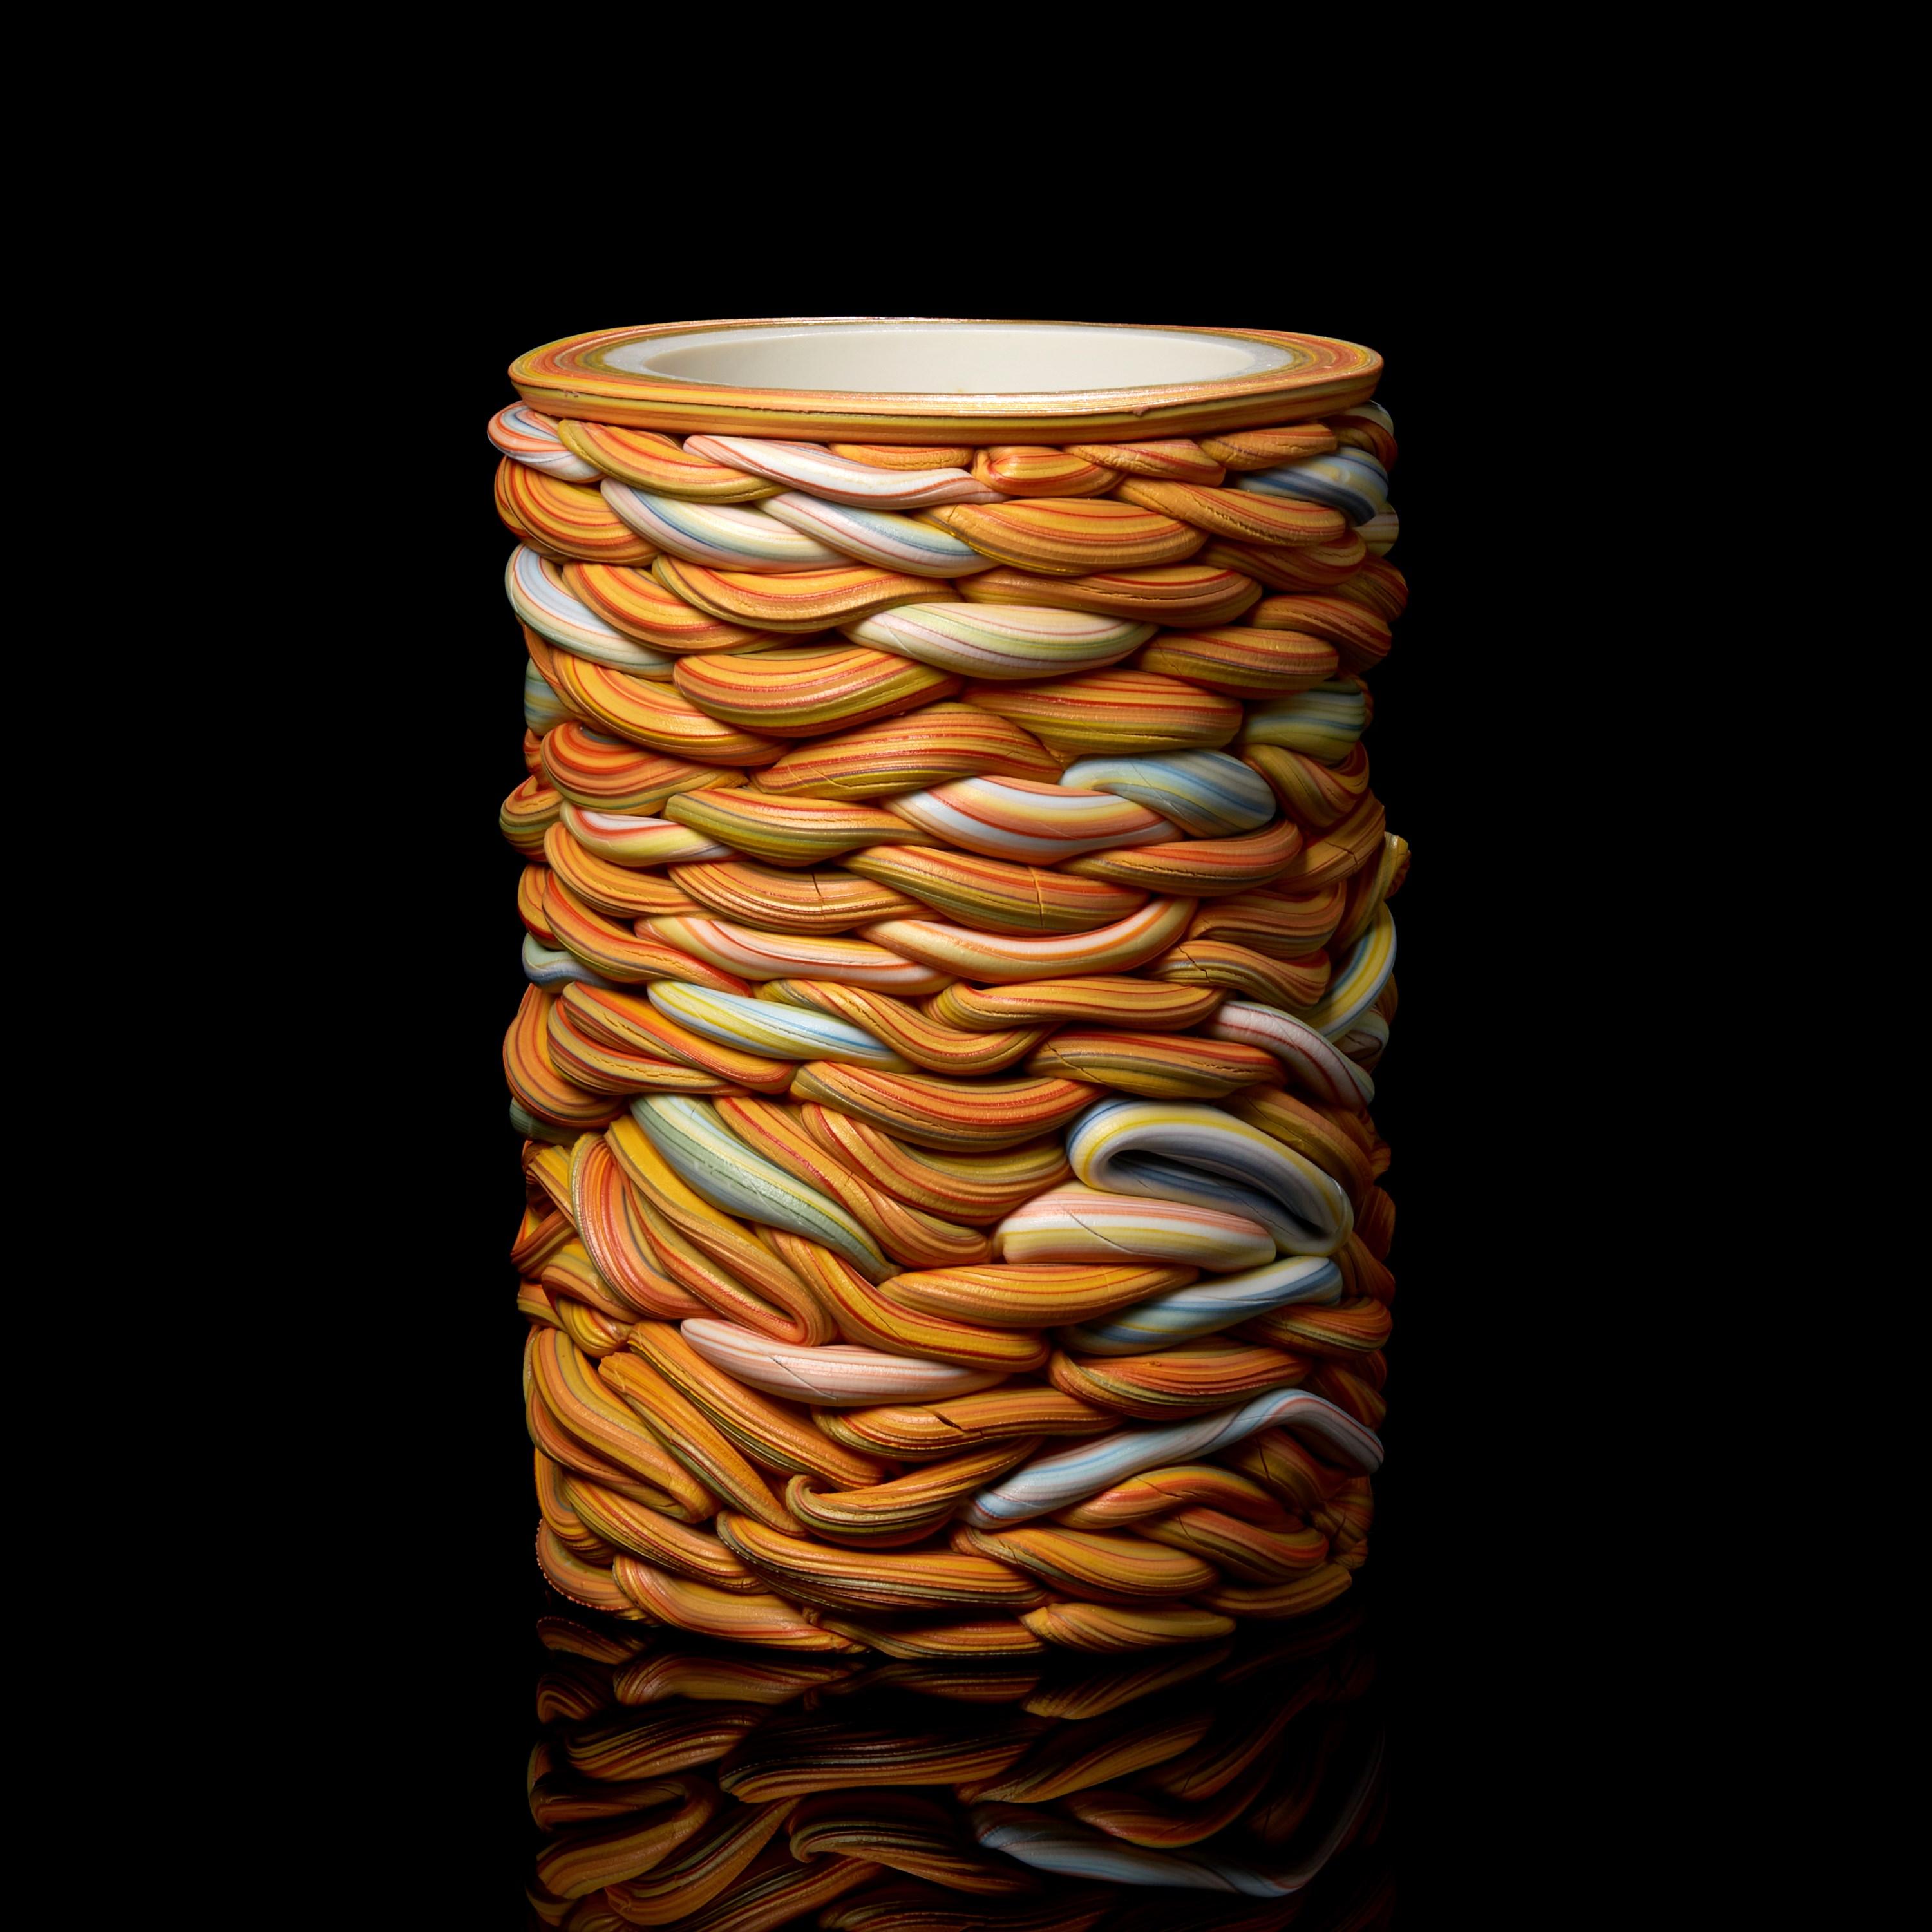 Hand-Crafted Striped Fold I, A Mixed Colour Porcelain Sculptural Vessel by Steven Edwards